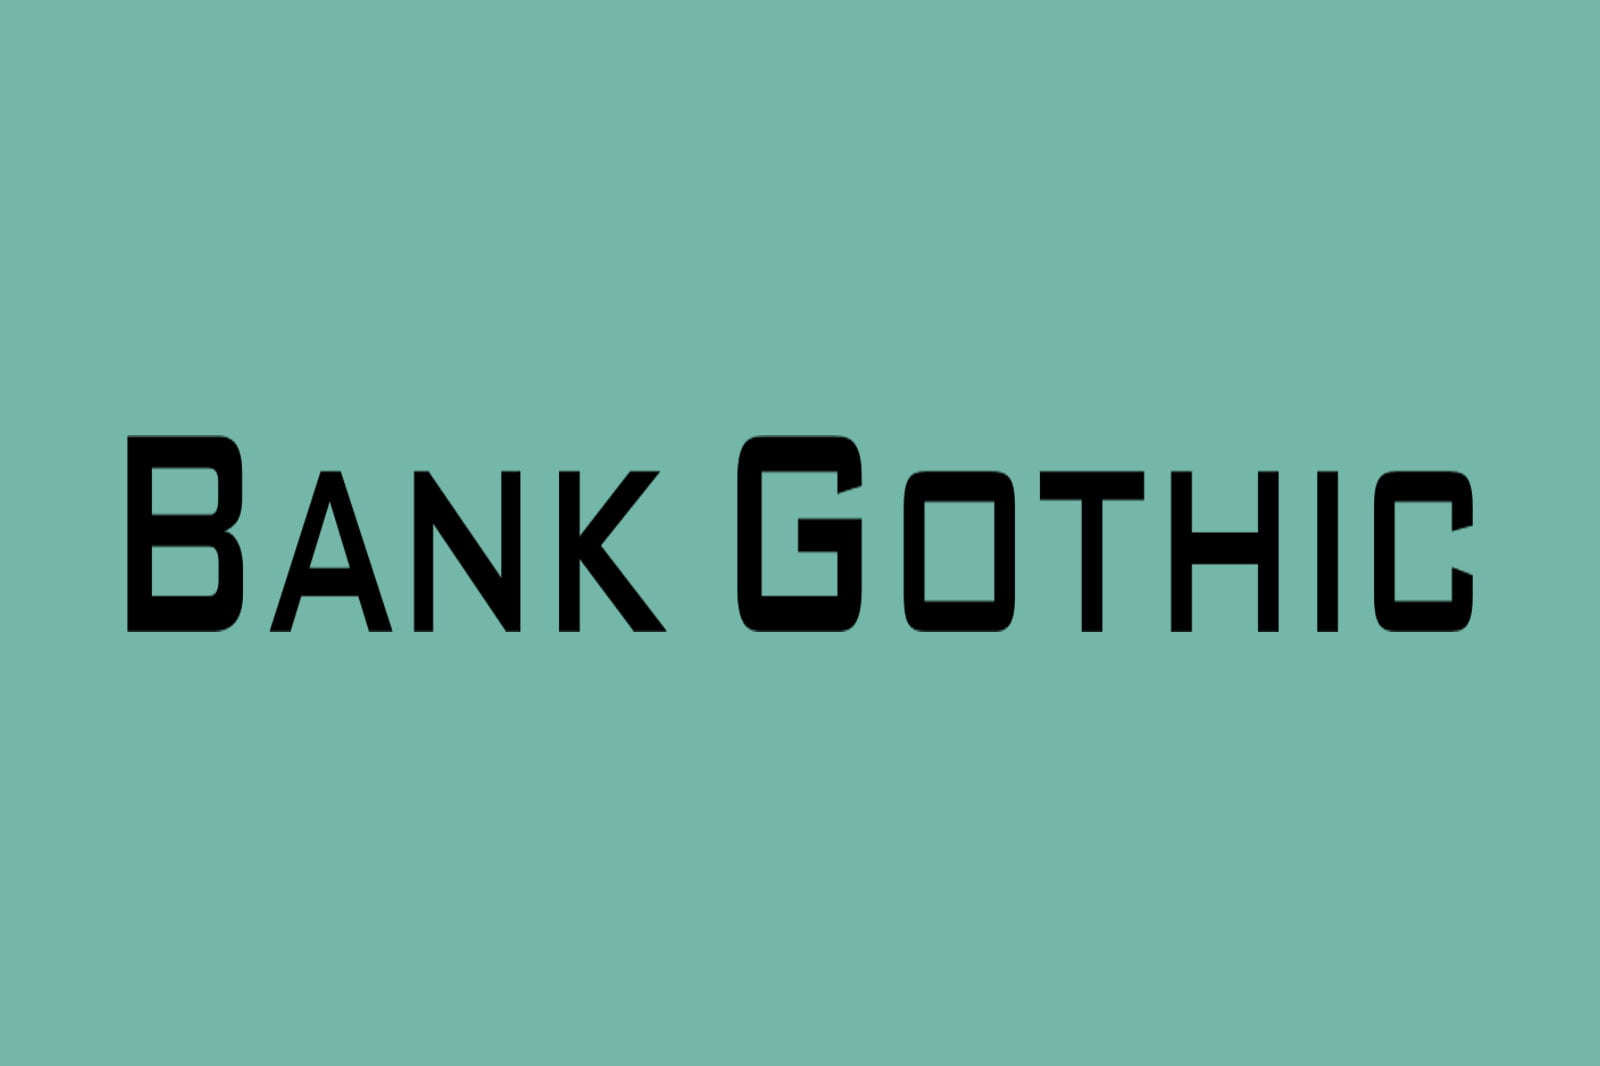 bank gothic font free download photoshop